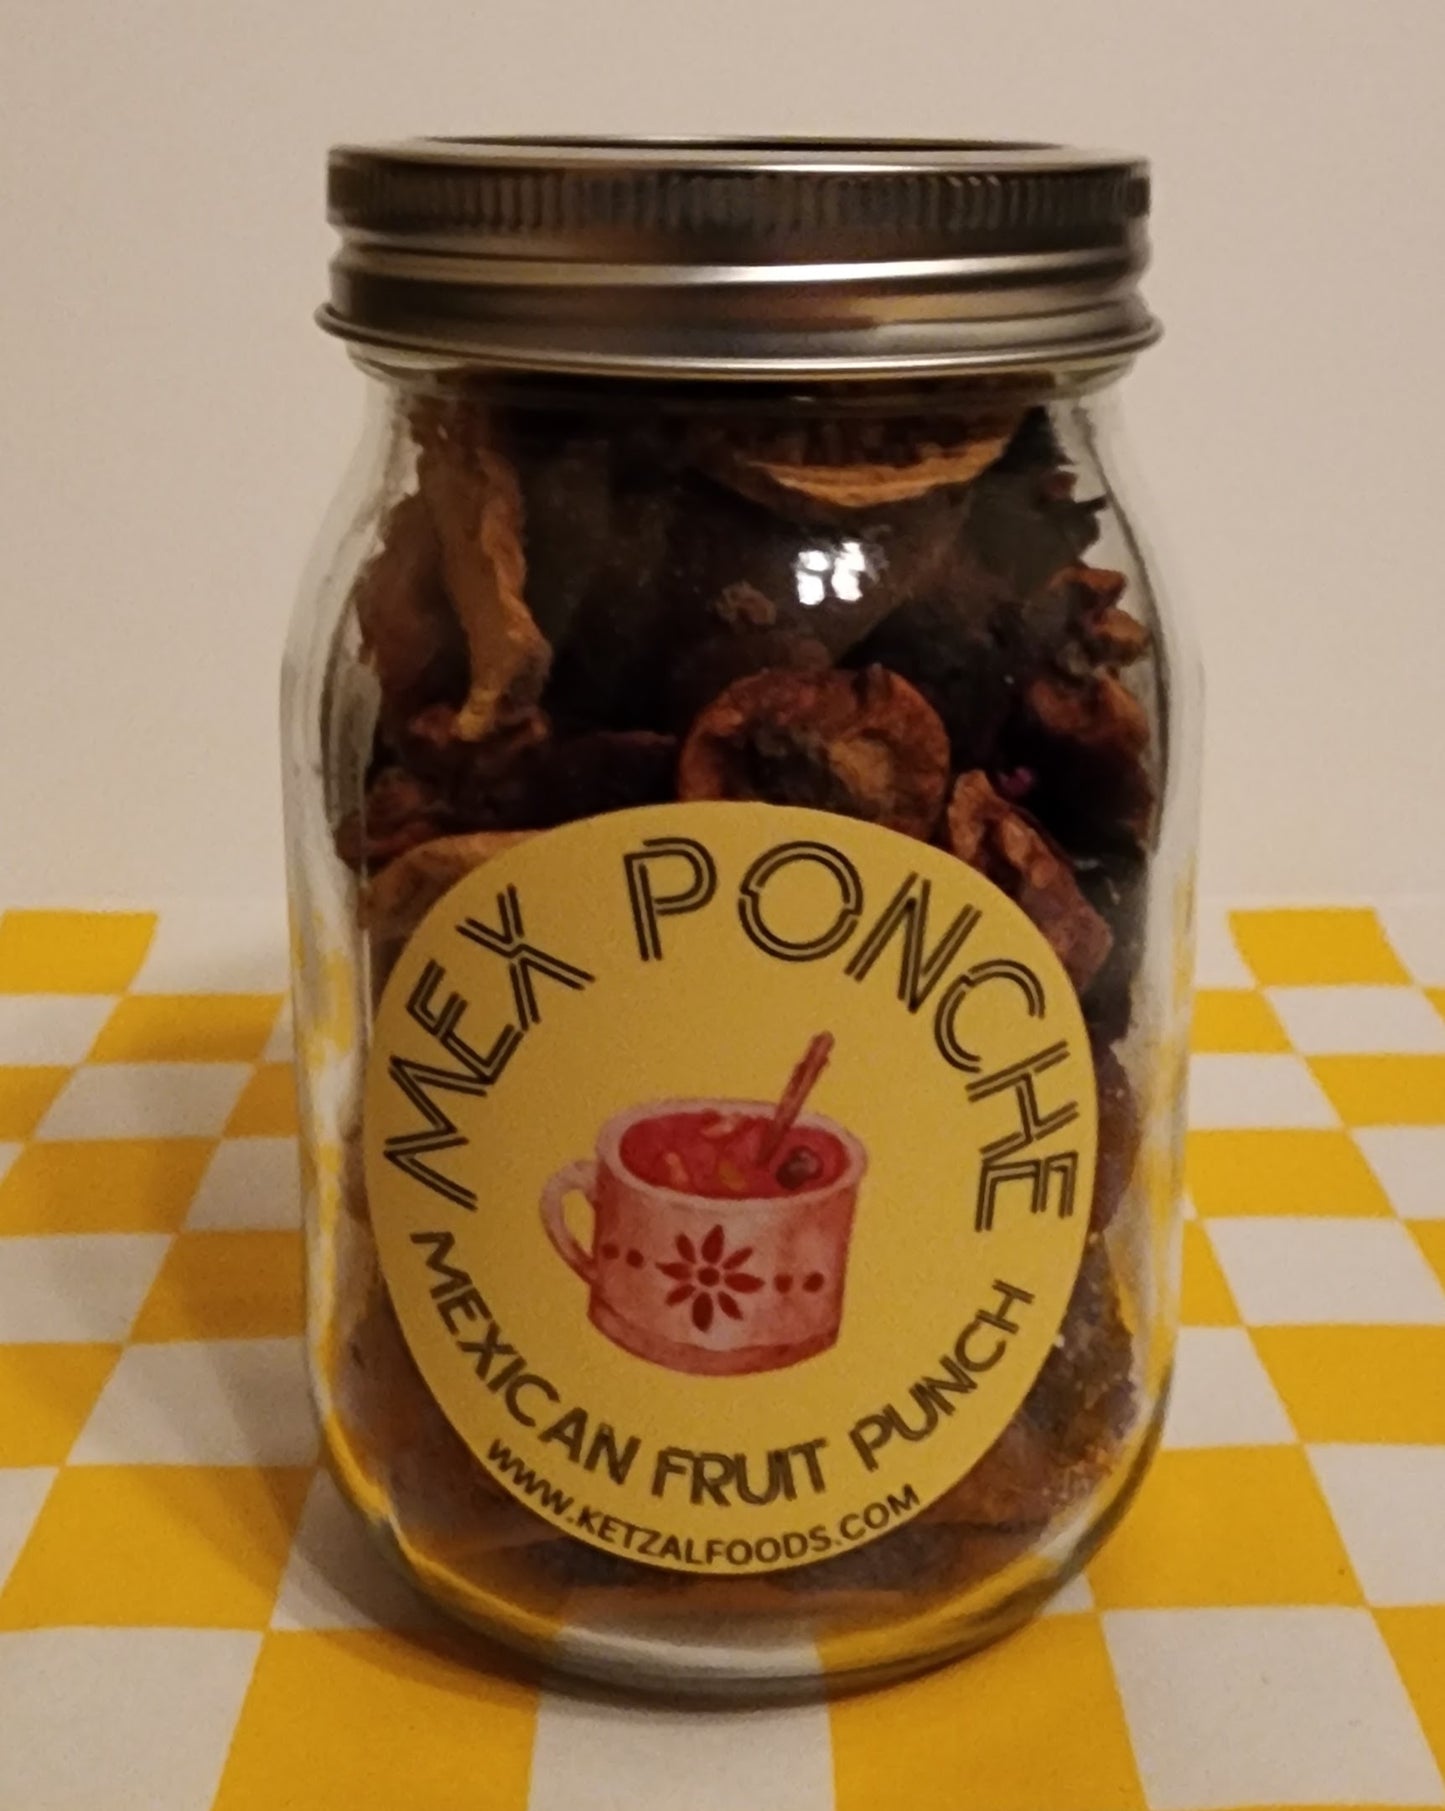 Ponche in a Glass Jar - Reusable Jar - Mexican Ponche - Fruit Punch Easy to Make